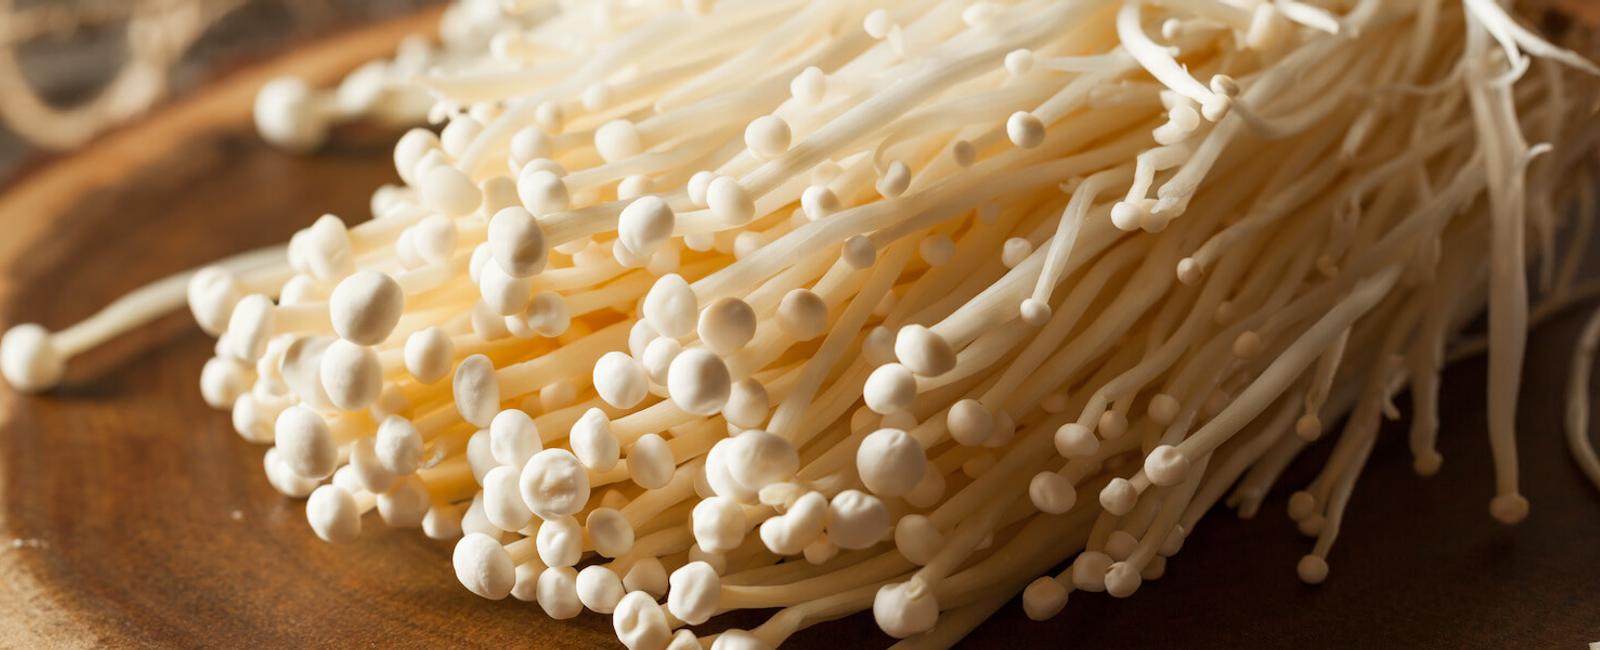 The Complete Guide to Enoki Mushrooms